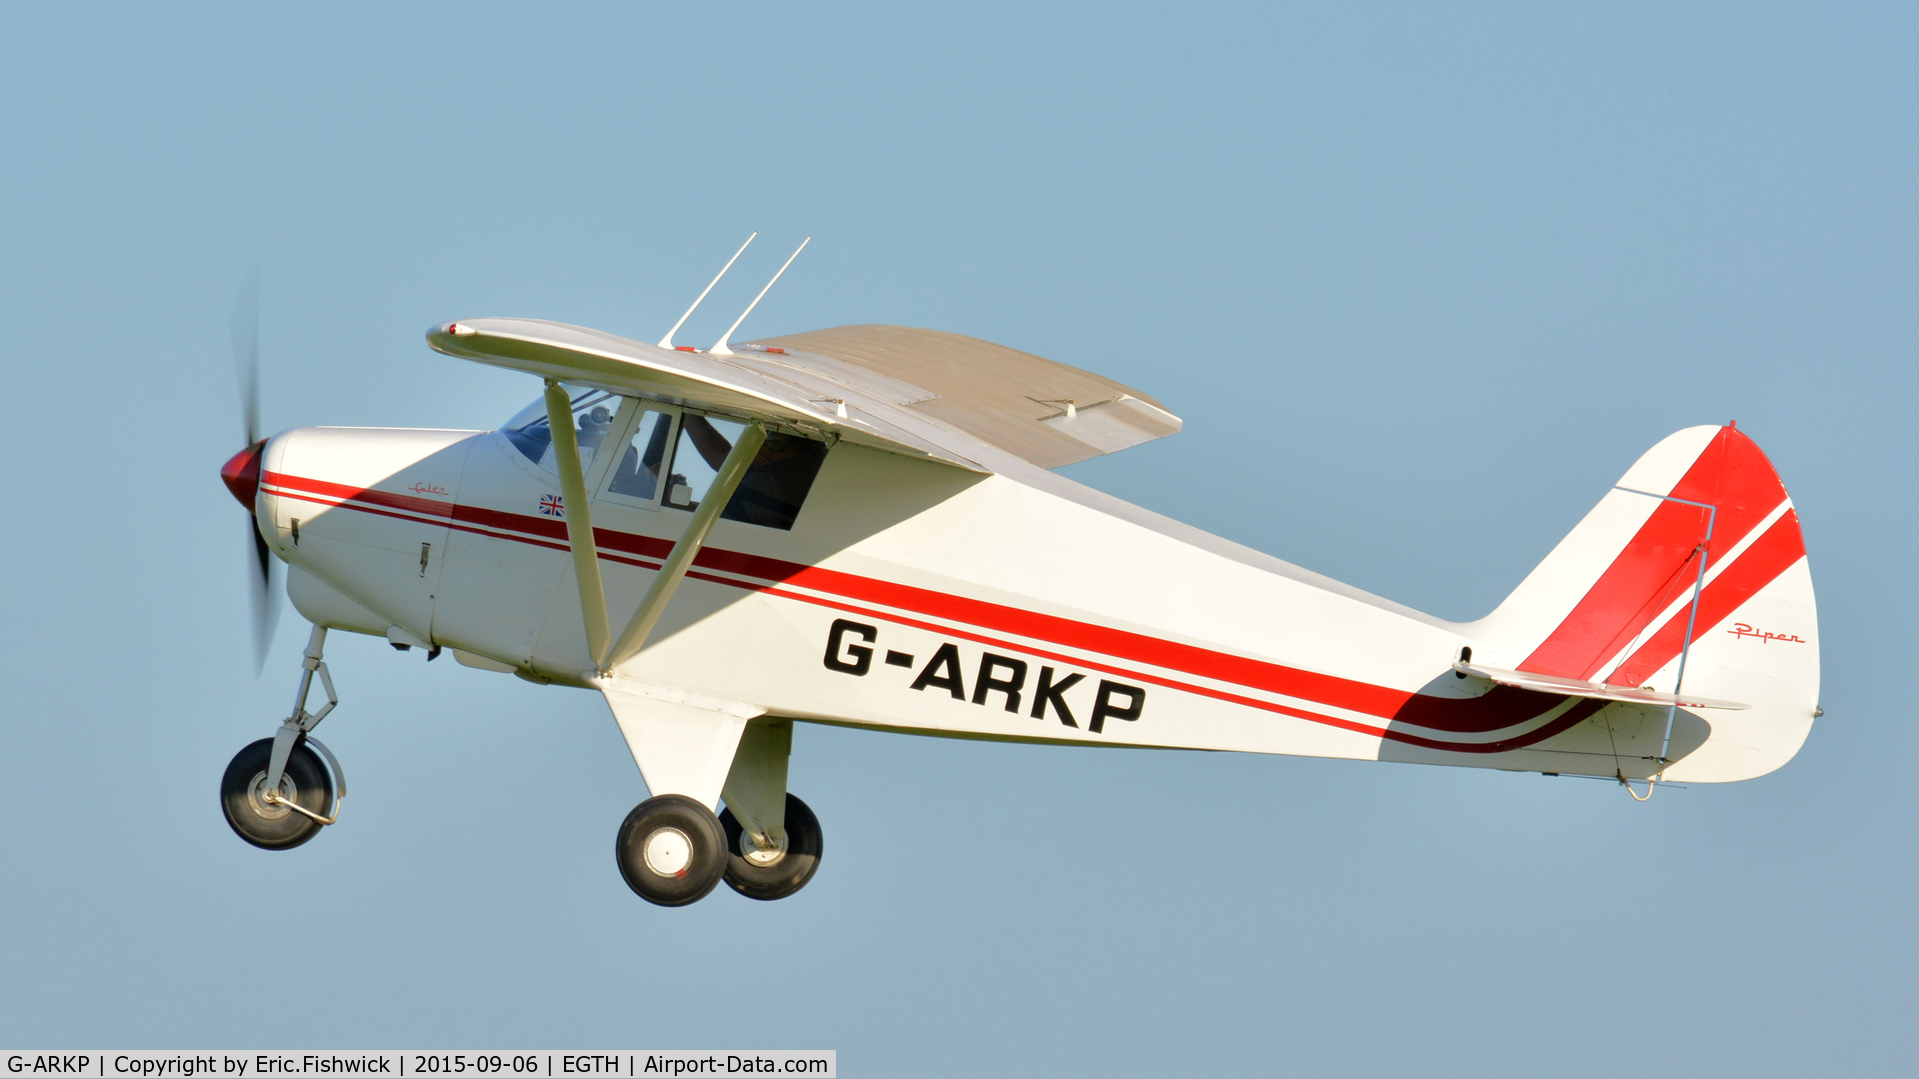 G-ARKP, 1961 Piper PA-22-108 Colt Colt C/N 22-8364, 41. G-ARKP departing The Shuttleworth Pagent Airshow, Sept. 2015.